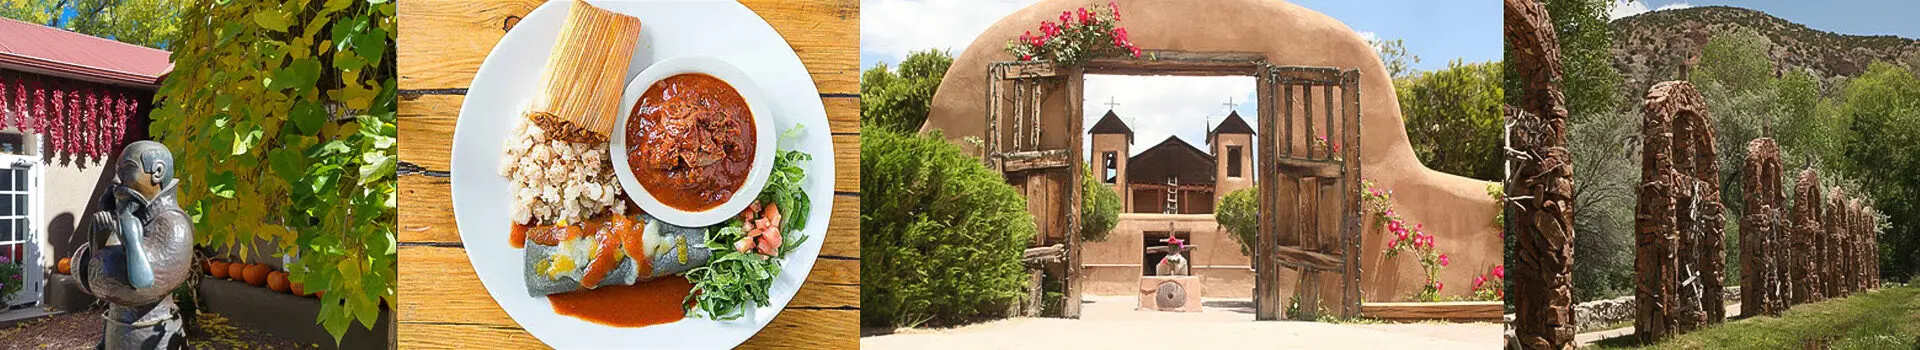 A montage of the church and restaurant and food at Chimayo